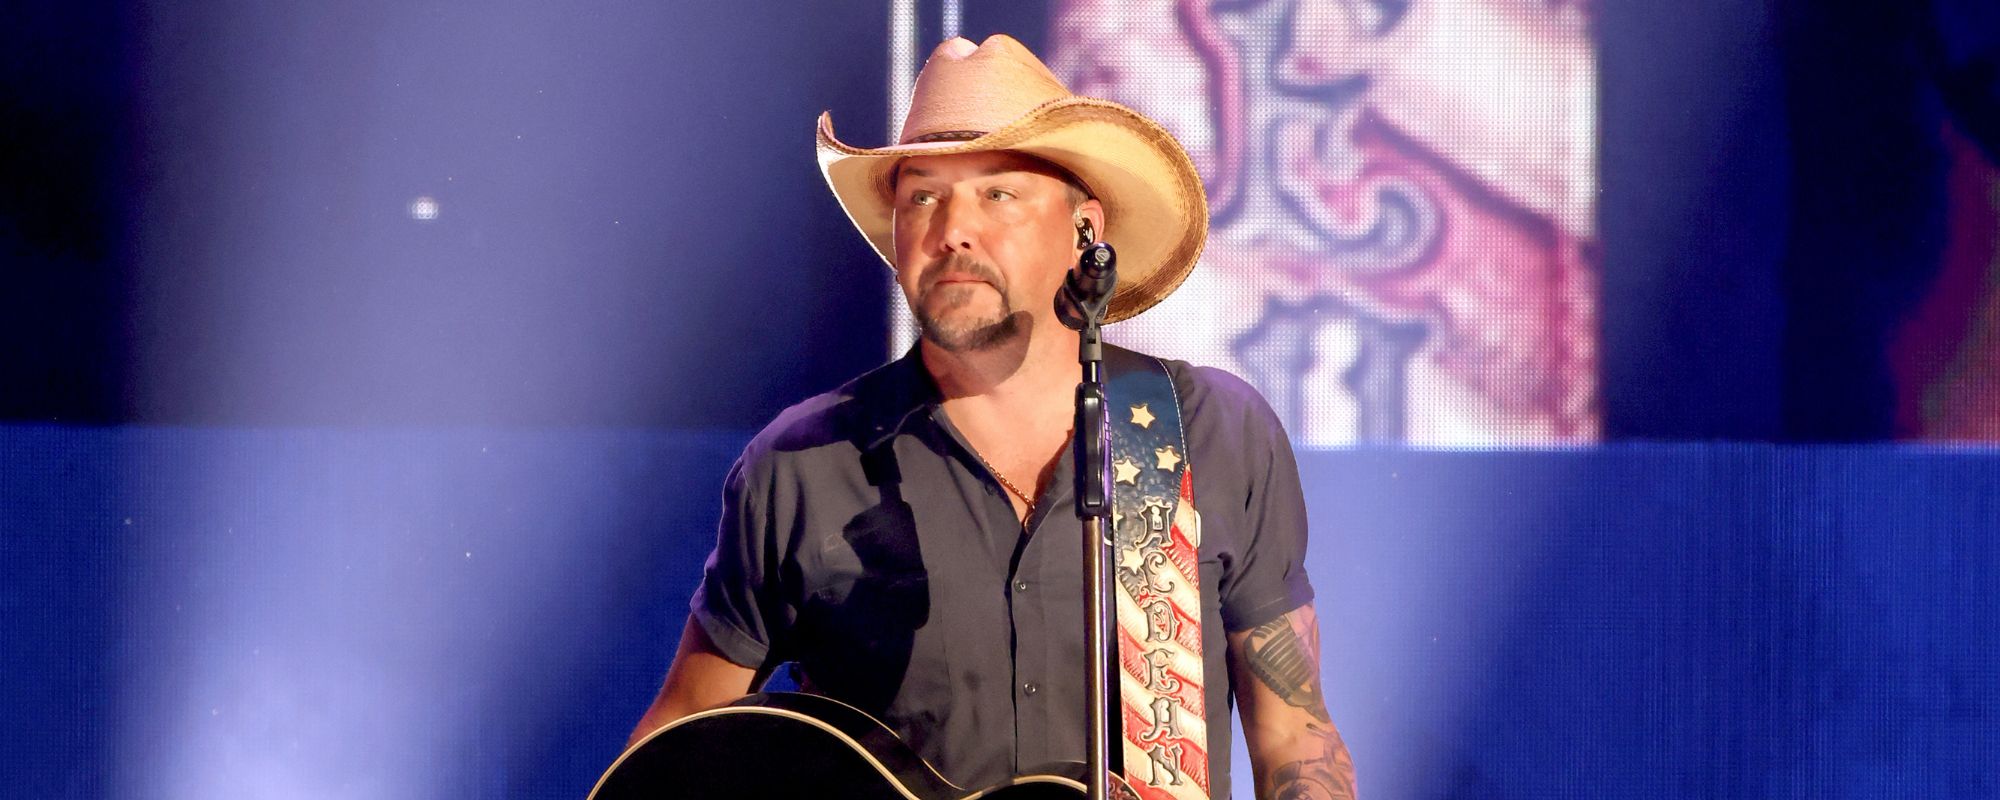 Jason Aldean Honors Toby Keith With Heartbreaking “Should’ve Been a Cowboy” ACM Awards Tribute Performance